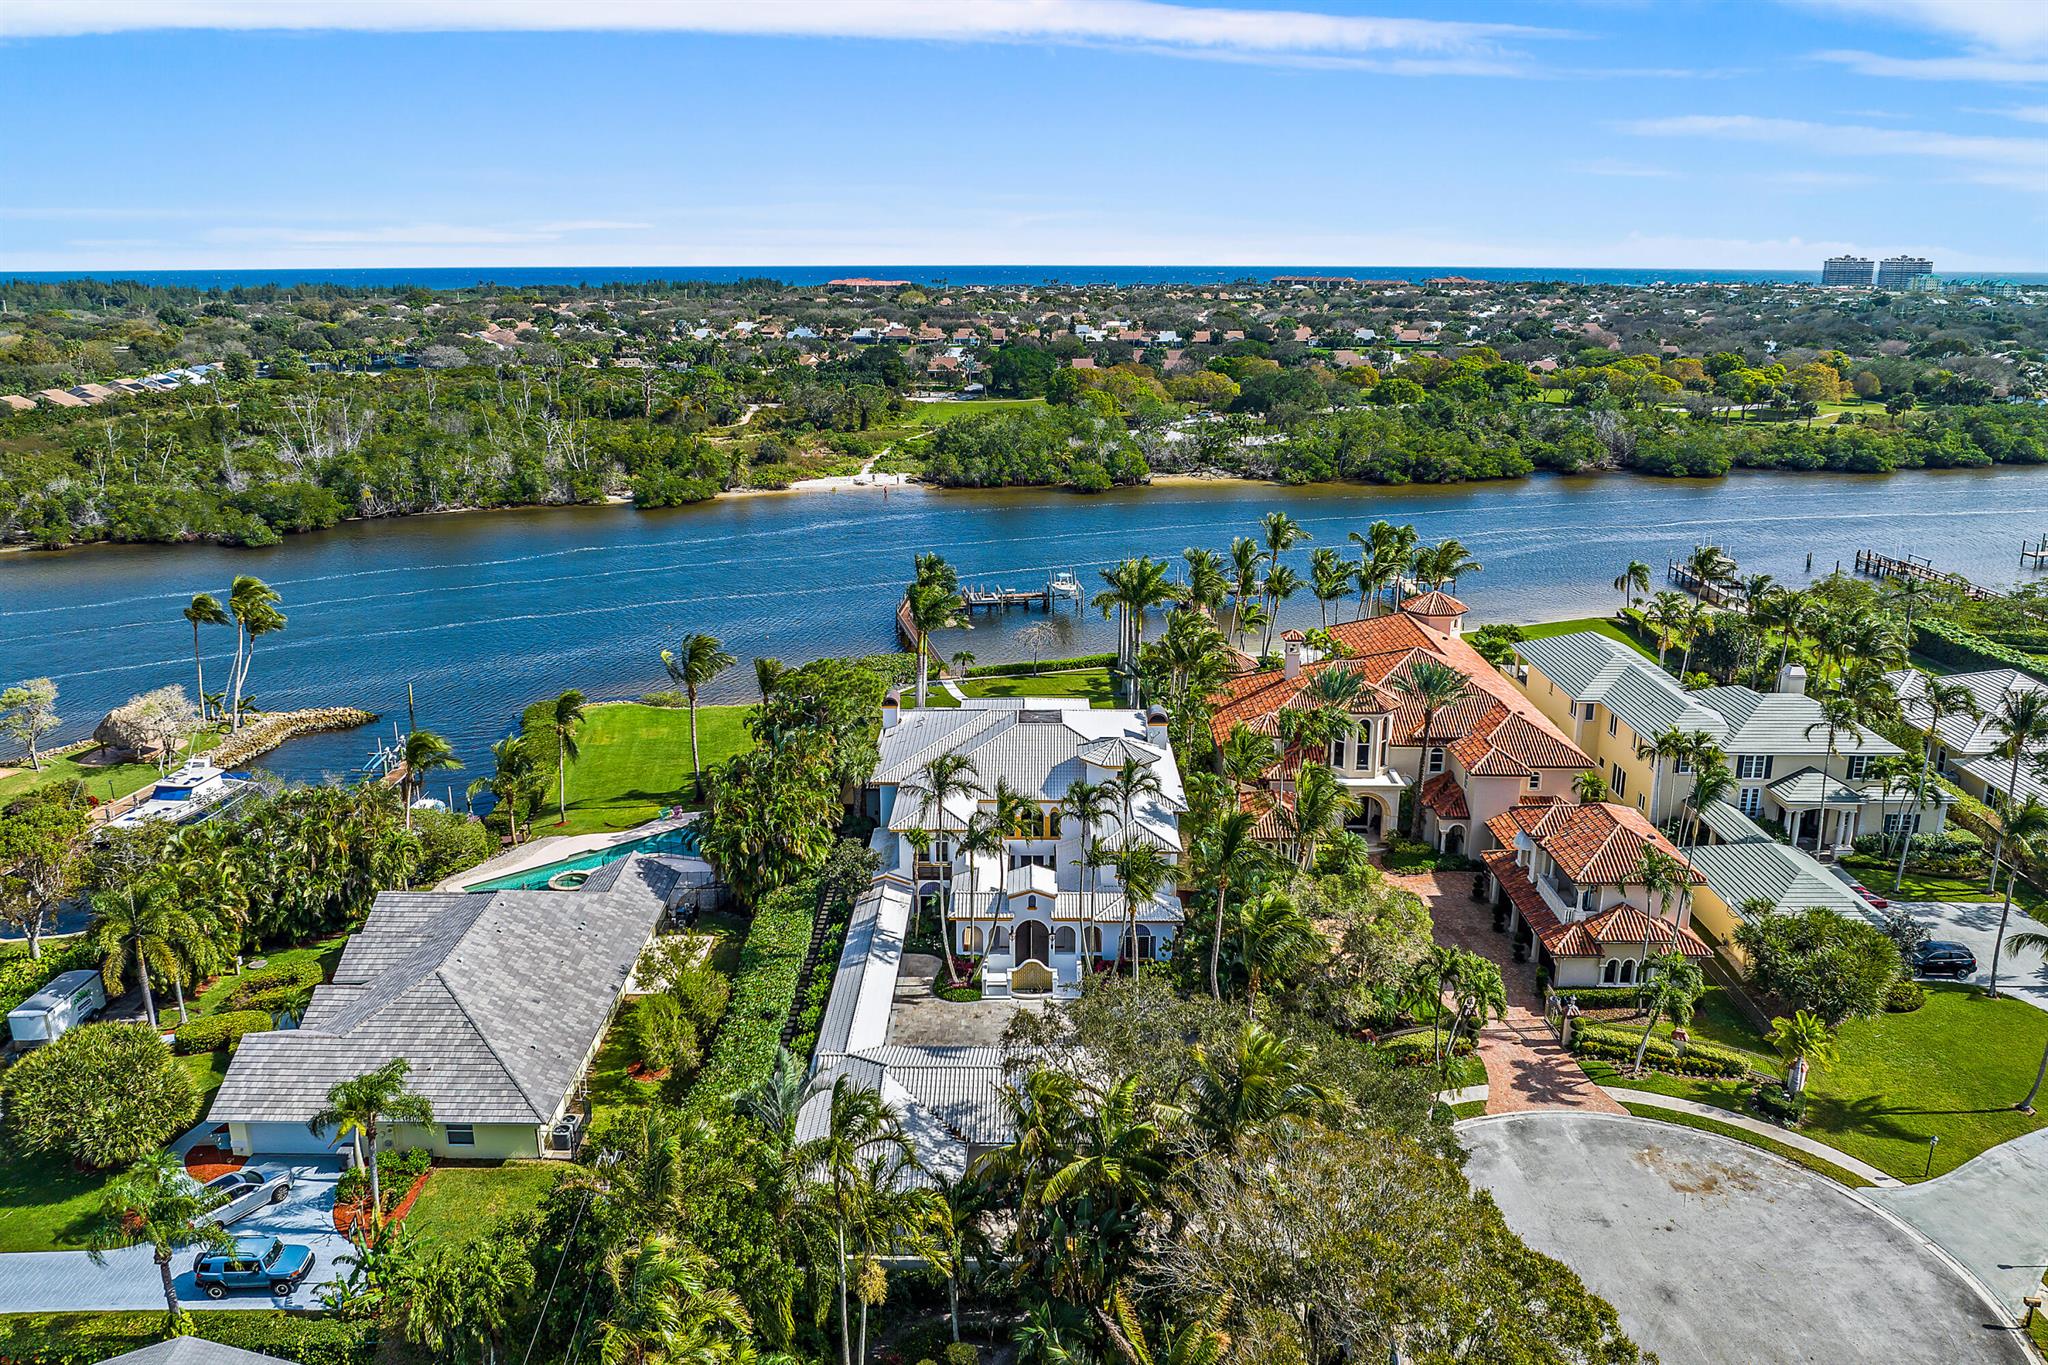 Several big luxury houses along a river in Florida.